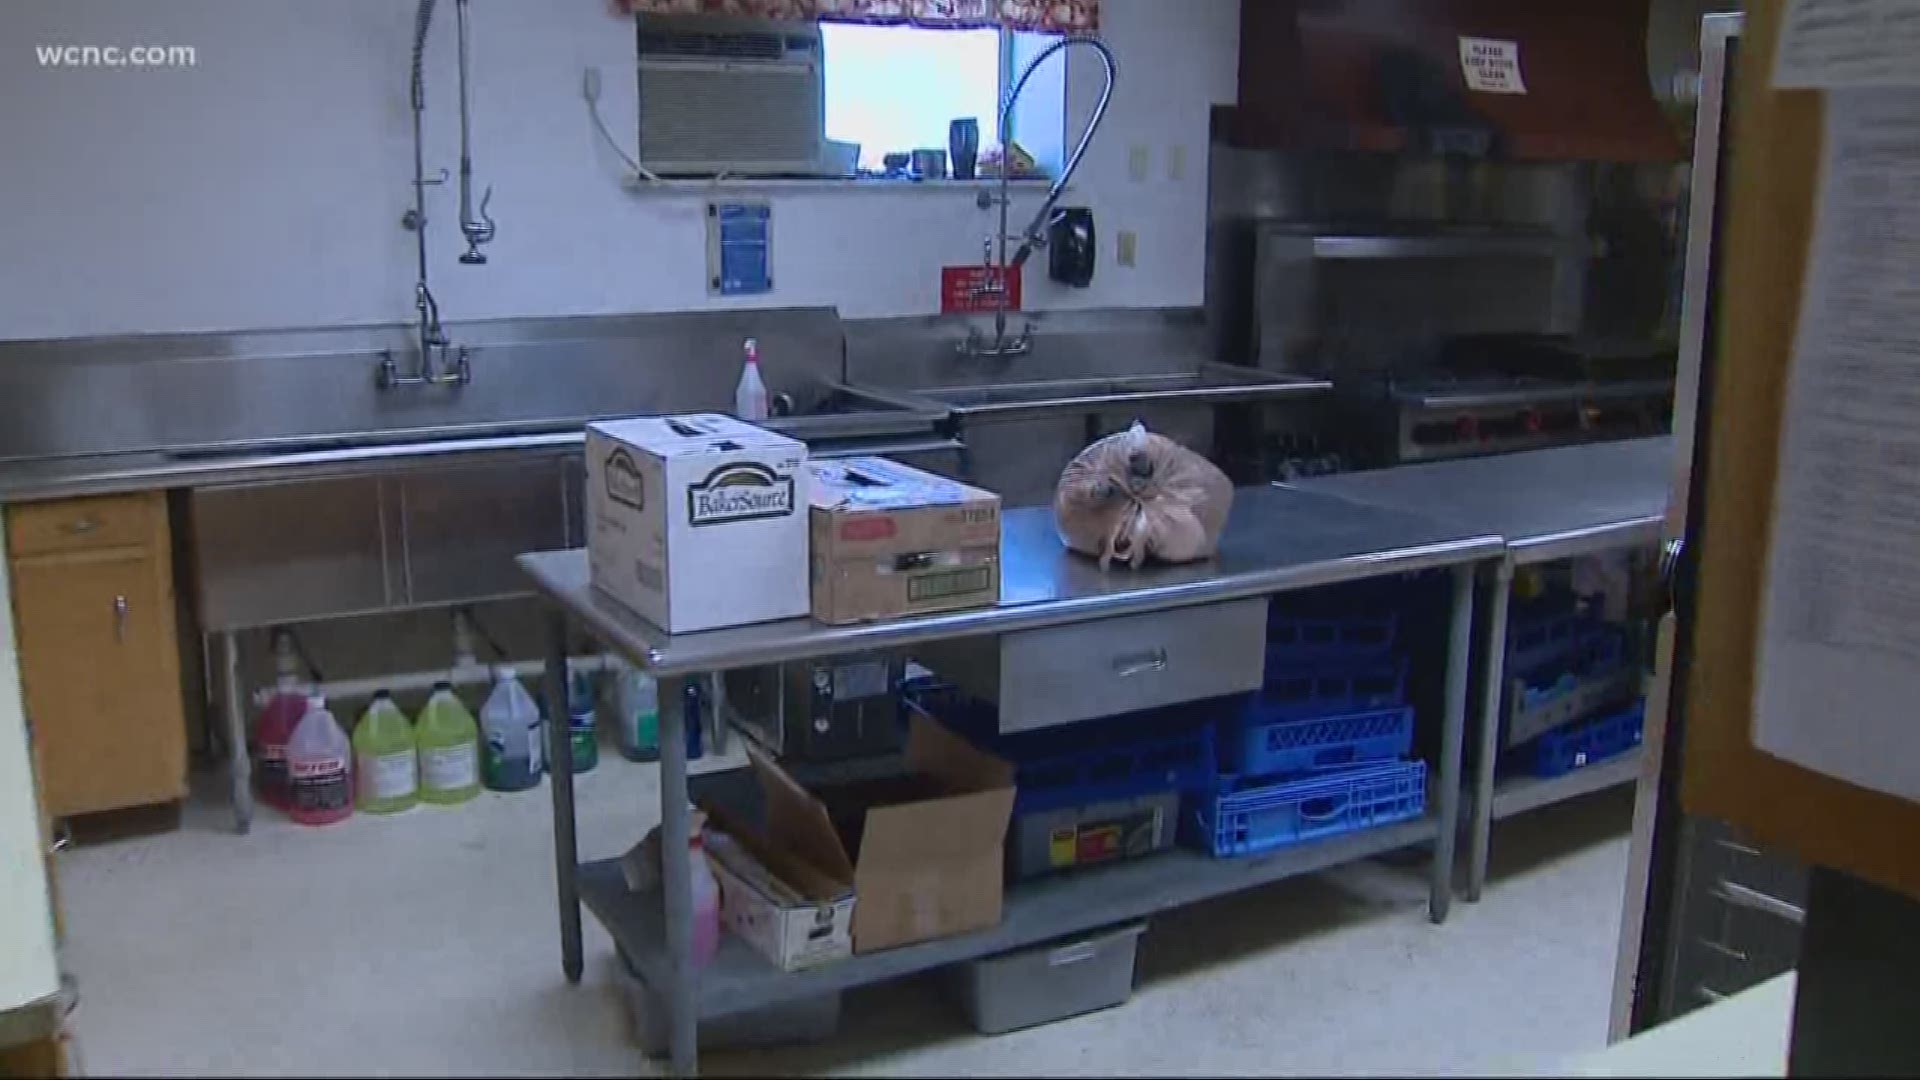 A local nonprofit cafe received a very generous donation from a stranger that will feed many members of the community.